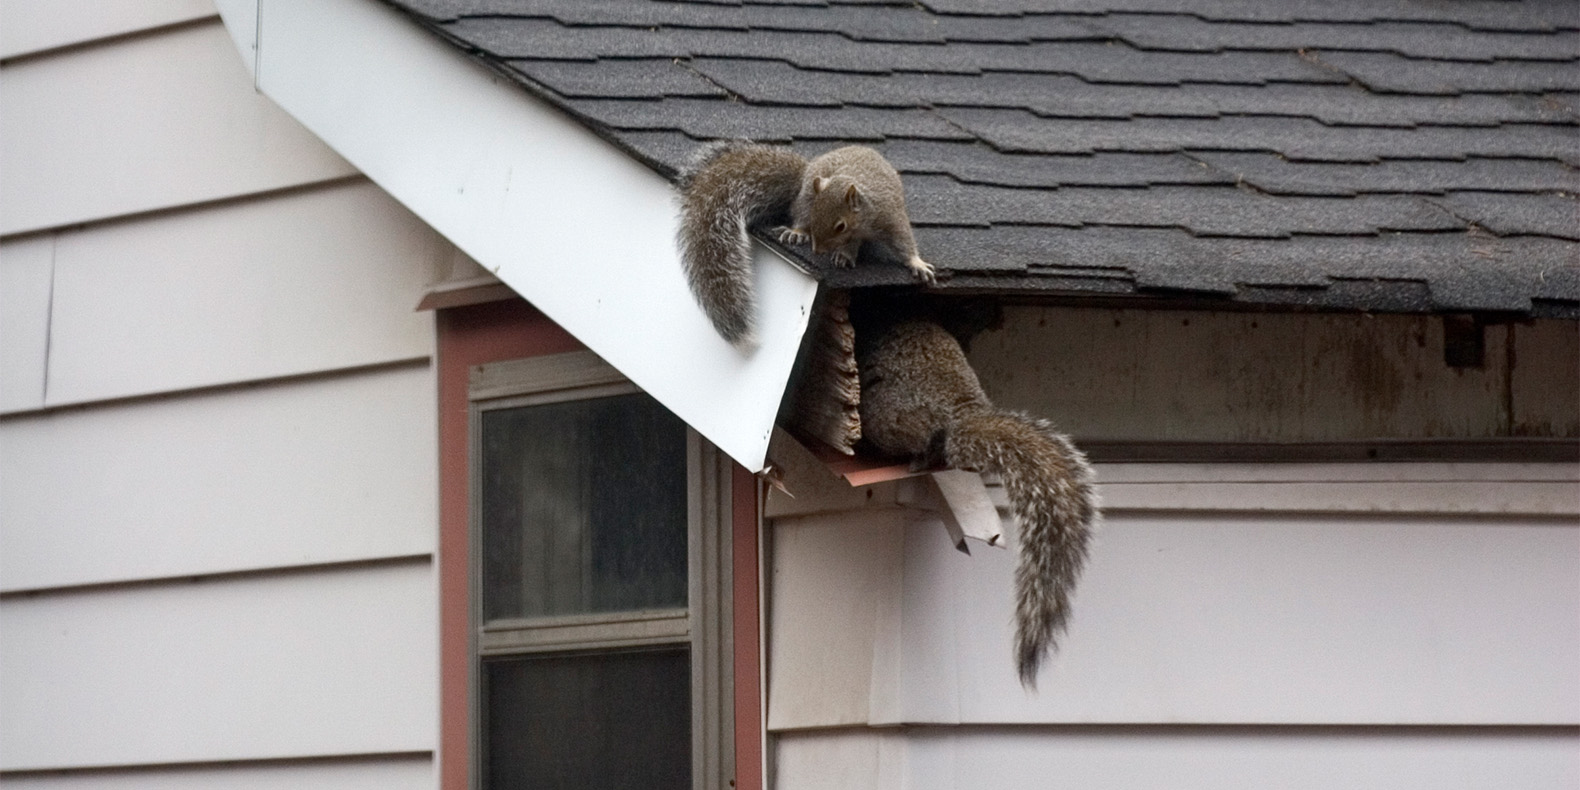 How to Prevent Squirrels and Other Rodents from Entering Your Home